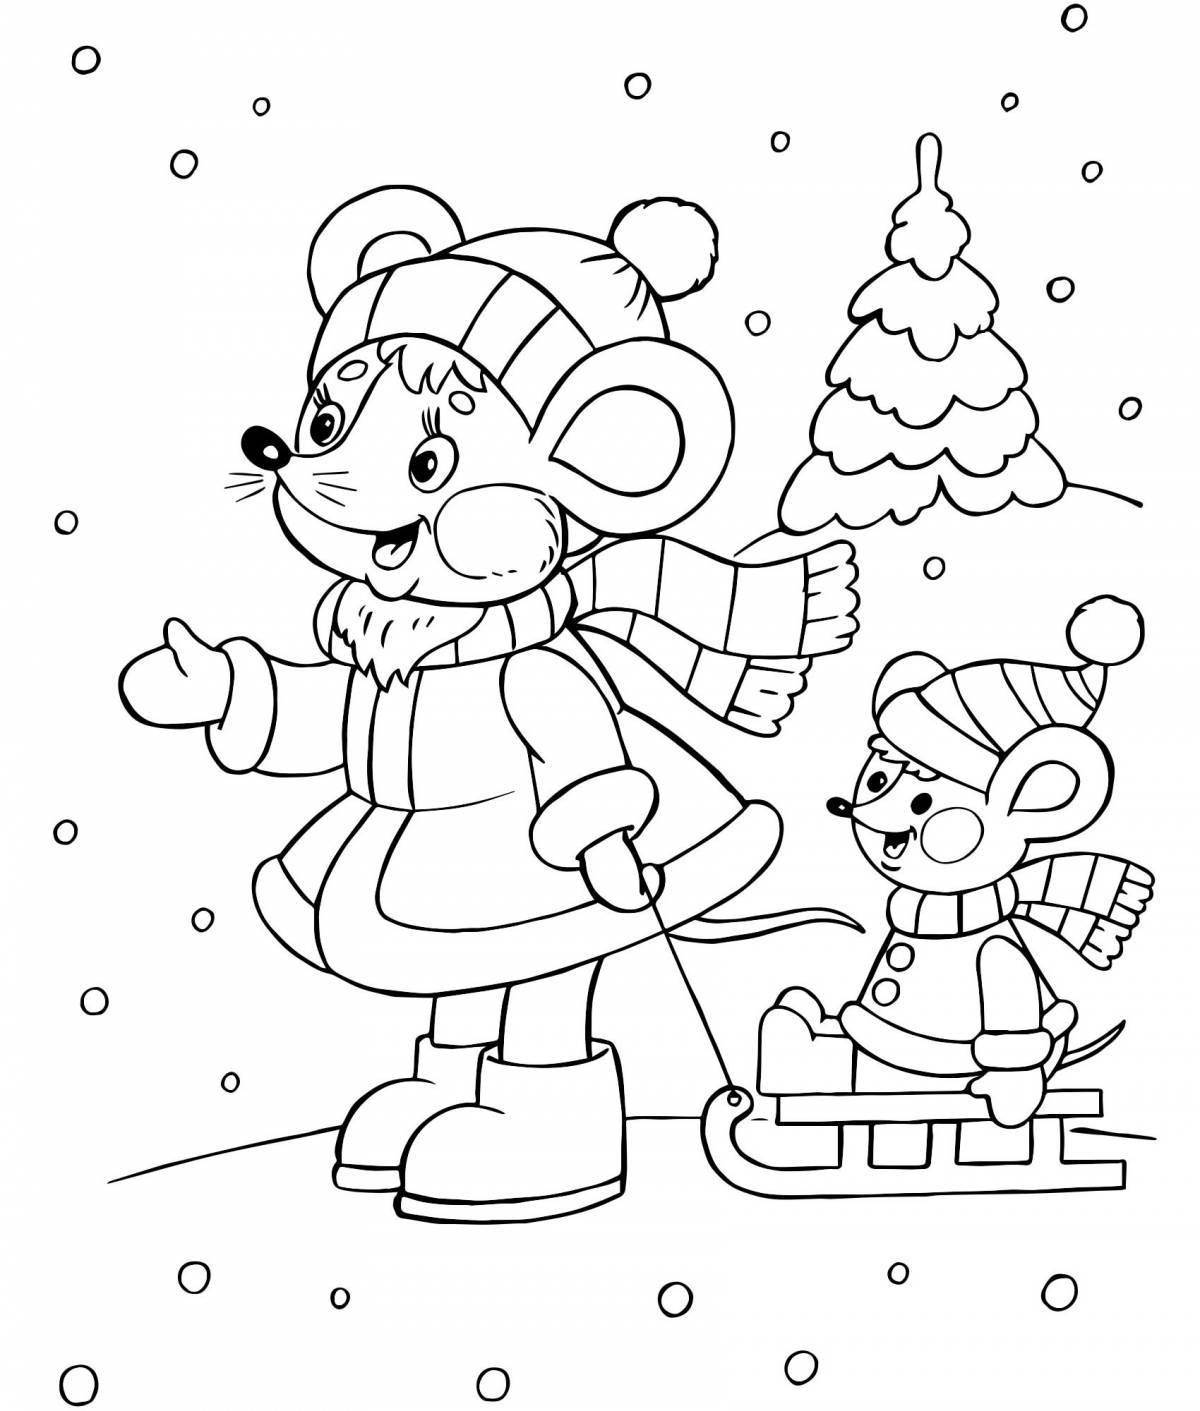 Whimsical Christmas coloring book for kids